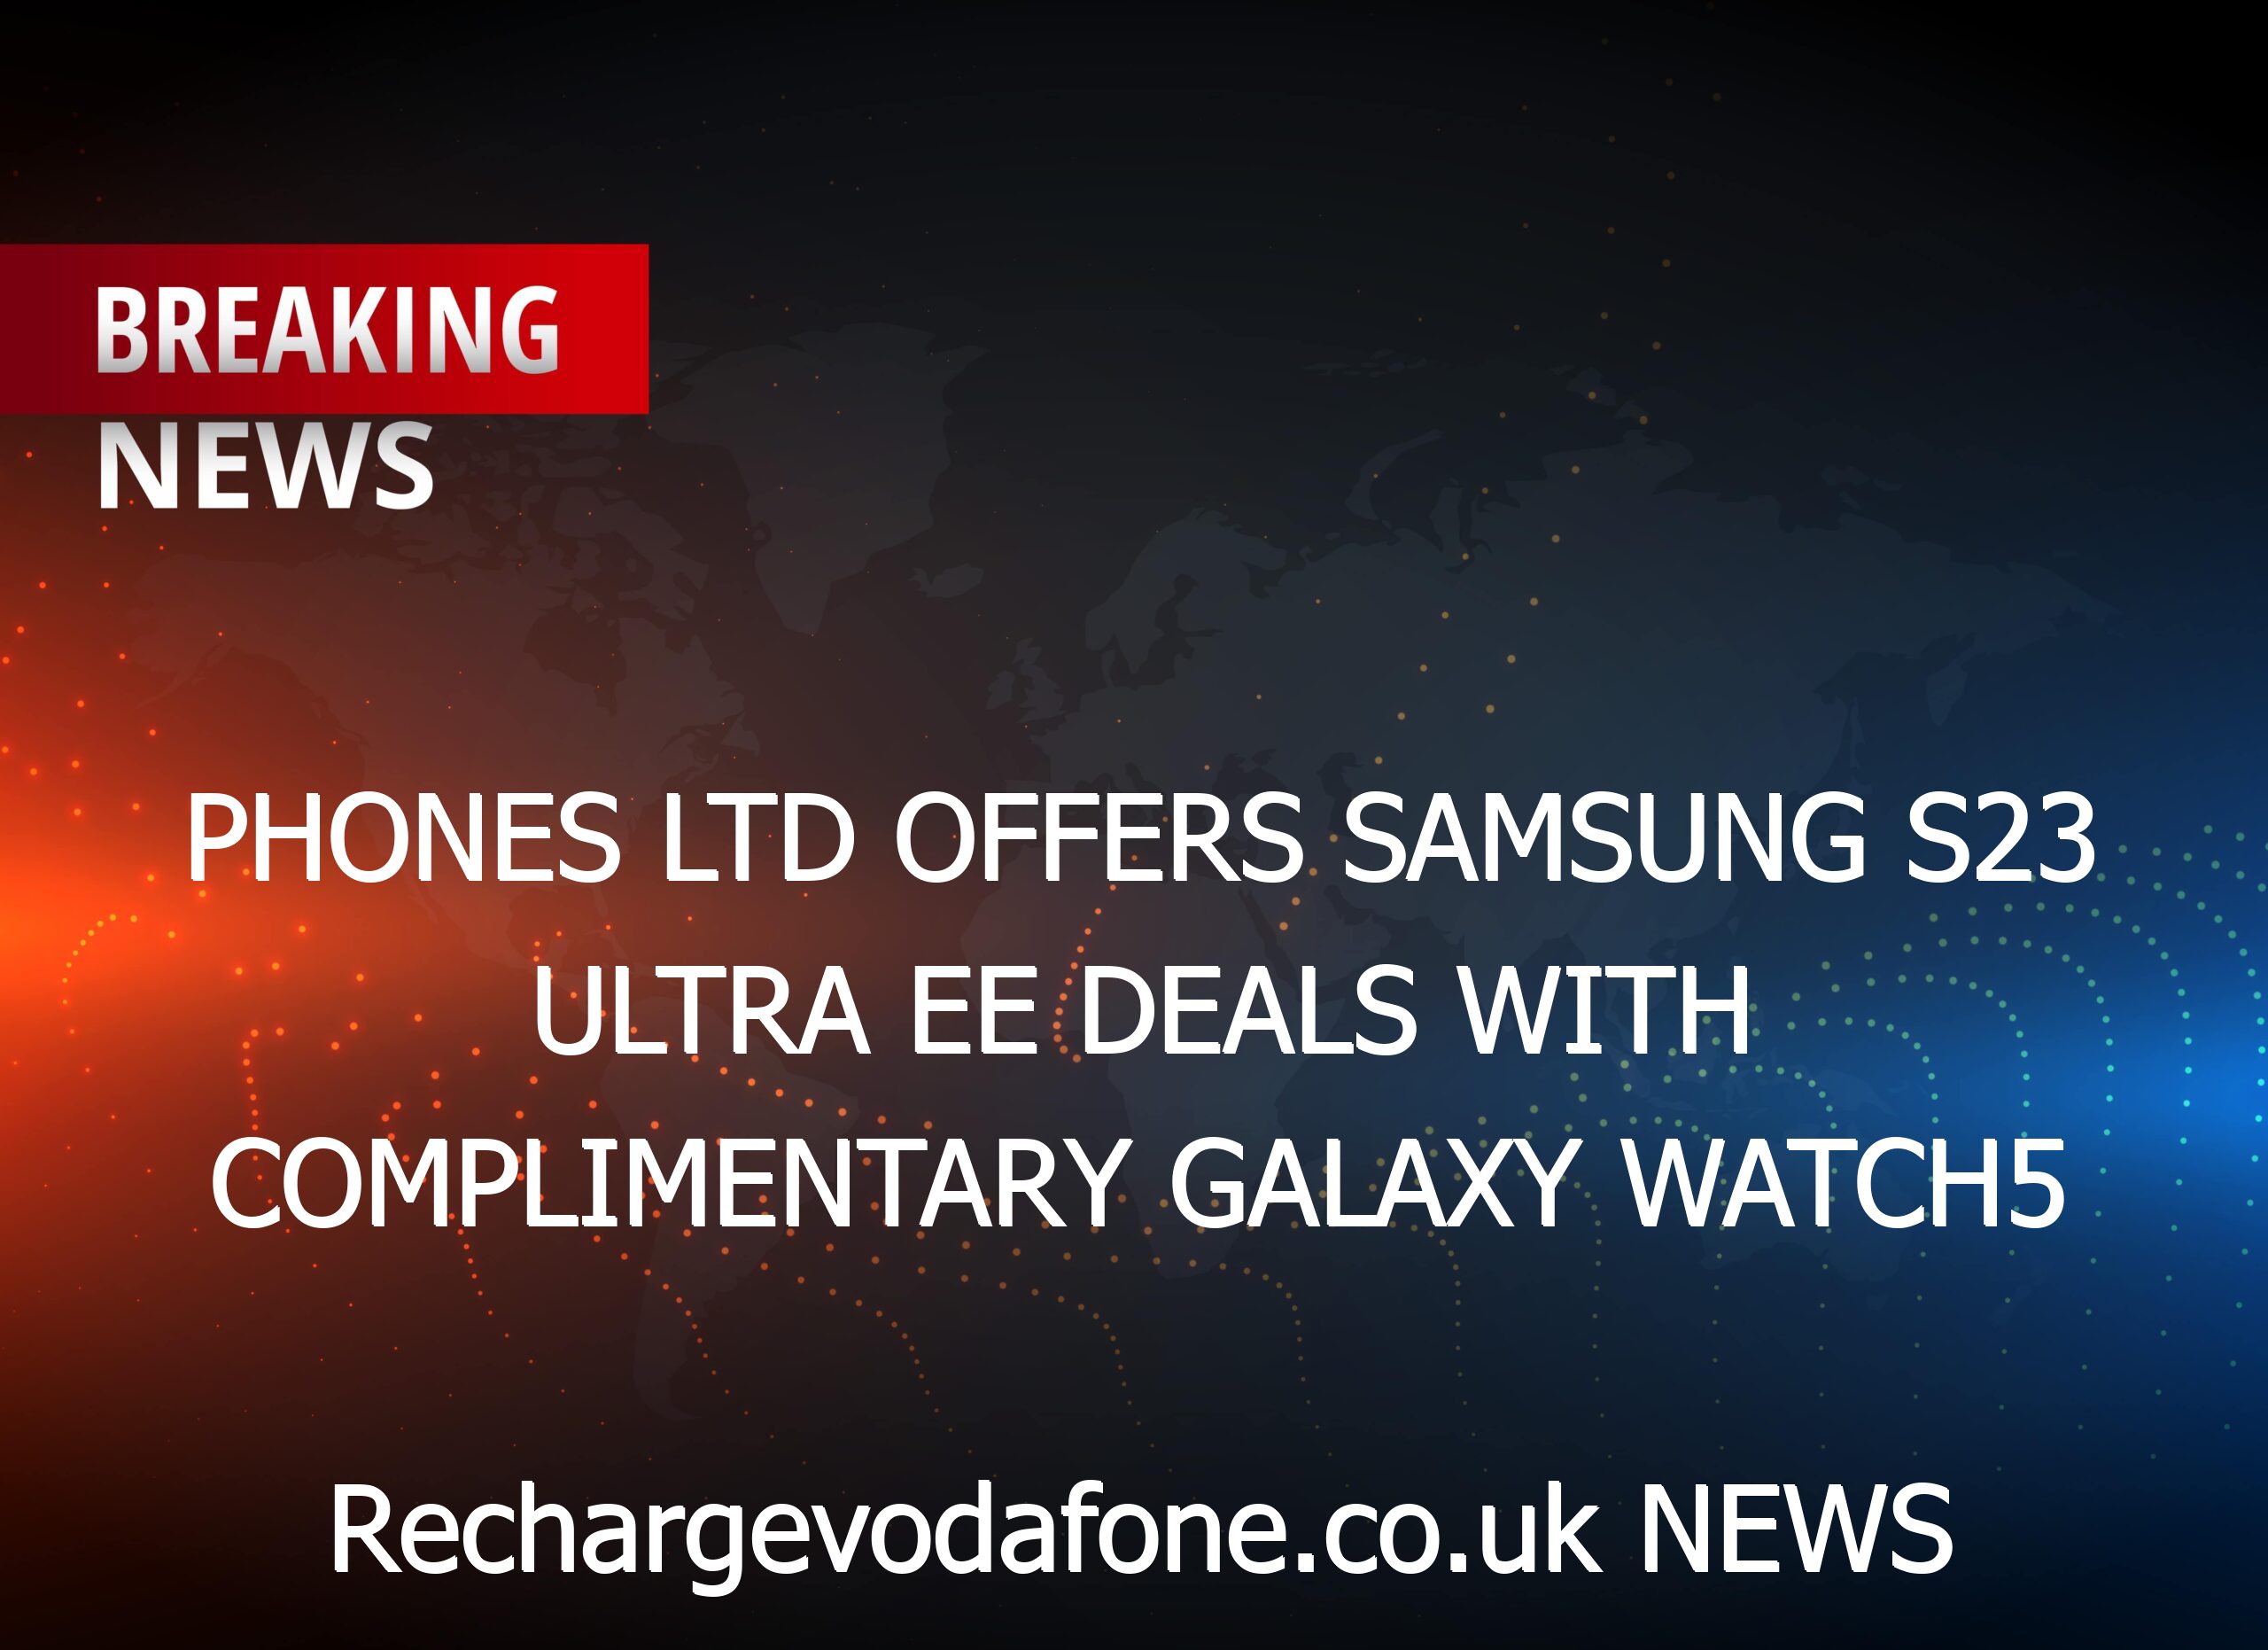 Phones LTD Offers Samsung S23 Ultra EE Deals with Complimentary Galaxy Watch5